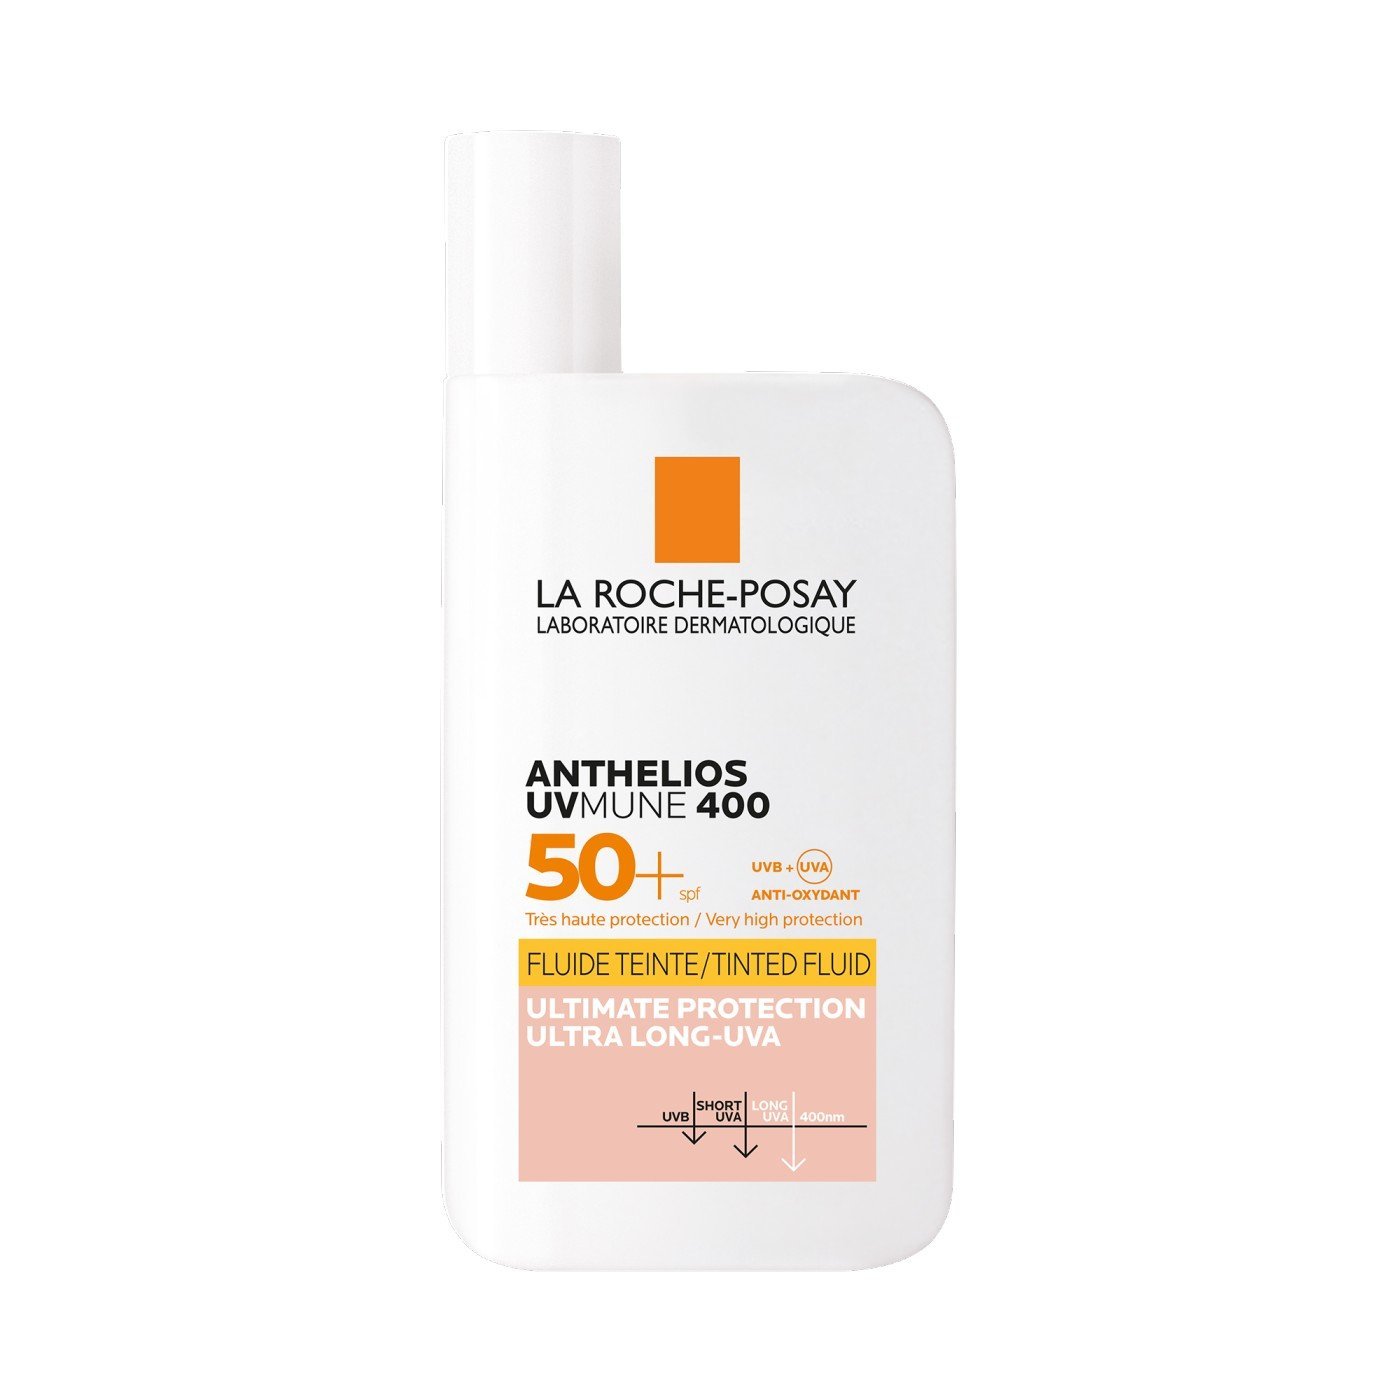 La Roche-Posay Anthelios UVA/UVB Fluid SPF 50+. A non-greasy, non-perfumed fluid with SPF 50+ protection.